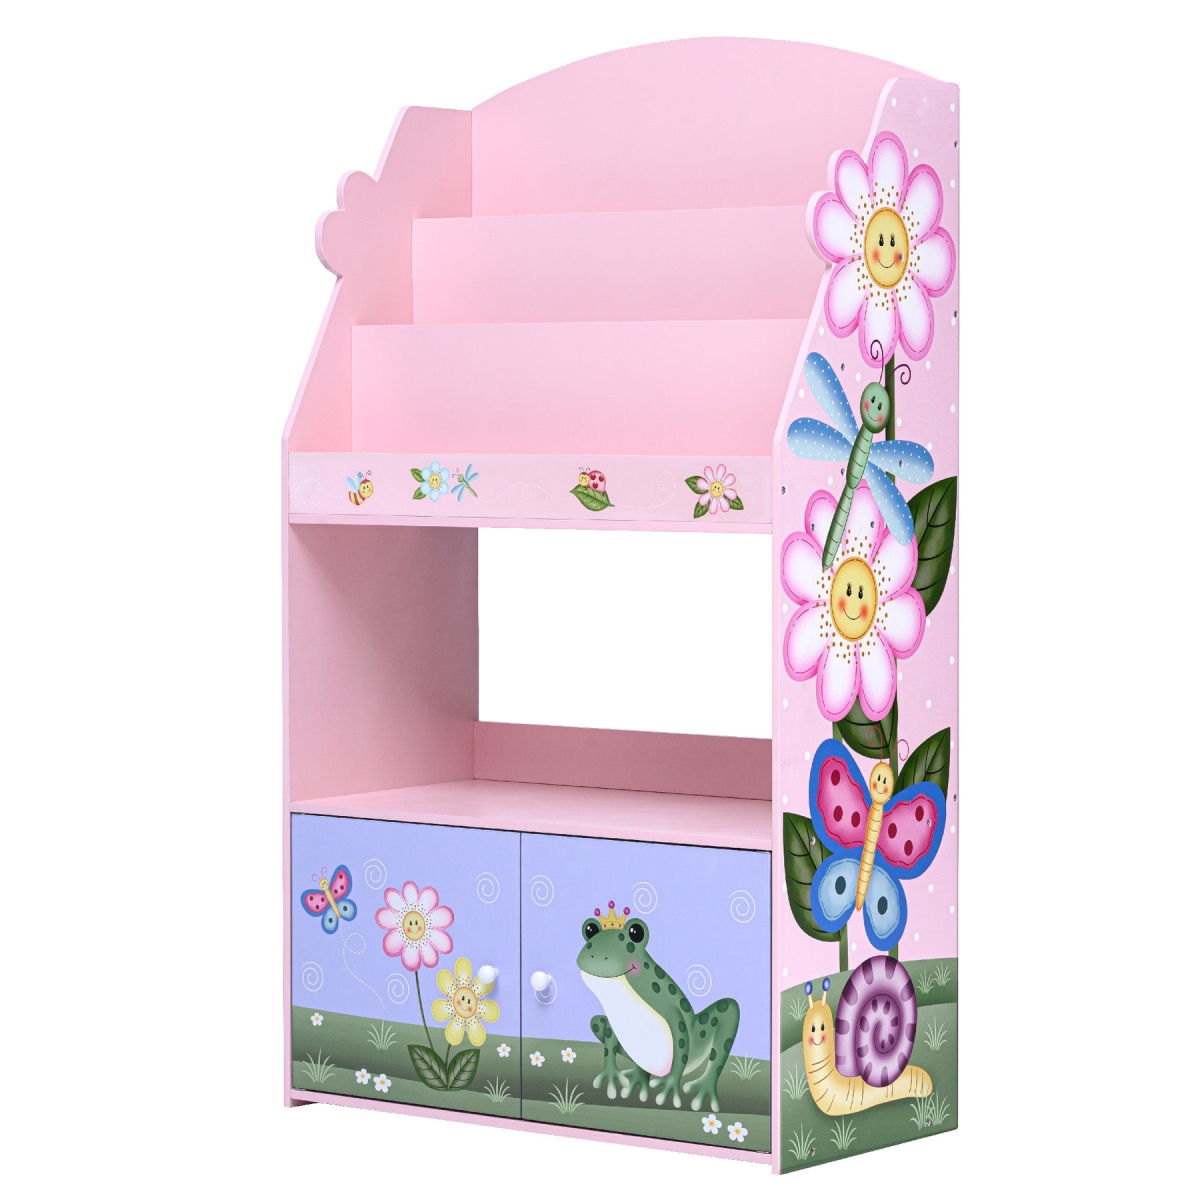 Picture of Teamson TD-13394MG Fantasy Fields Magic Garden Kids 3-Tier Wooden Bookshelf with Storage, Multi Color